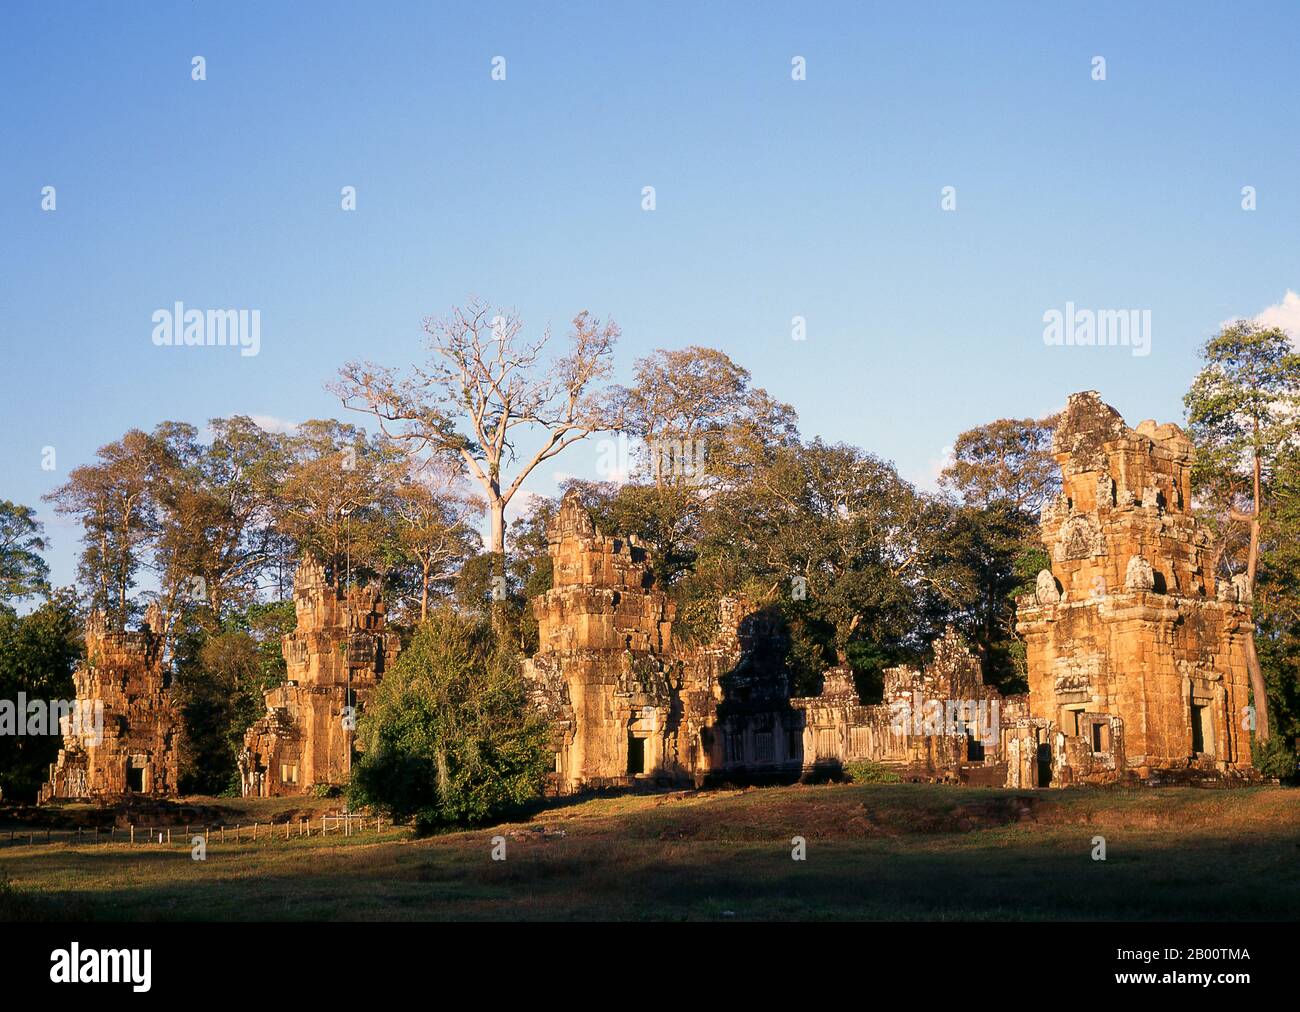 Cambodia: Suor Prat Towers at sunset, Angkor Thom.  Suor Prat Towers or 'Towers of the Rope Dancers' were built in the early 13th century.  Angkor Thom, meaning ‘The Great City’, is located one mile north of Angkor Wat. It was built in the late 12th century CE by King Jayavarman VII, and covers an area of 9 km², within which are located several monuments from earlier eras as well as those established by Jayavarman and his successors. It is believed to have sustained a population of 80,000-150,000 people. At the centre of the city is Jayavarman's state temple, the Bayon. Stock Photo